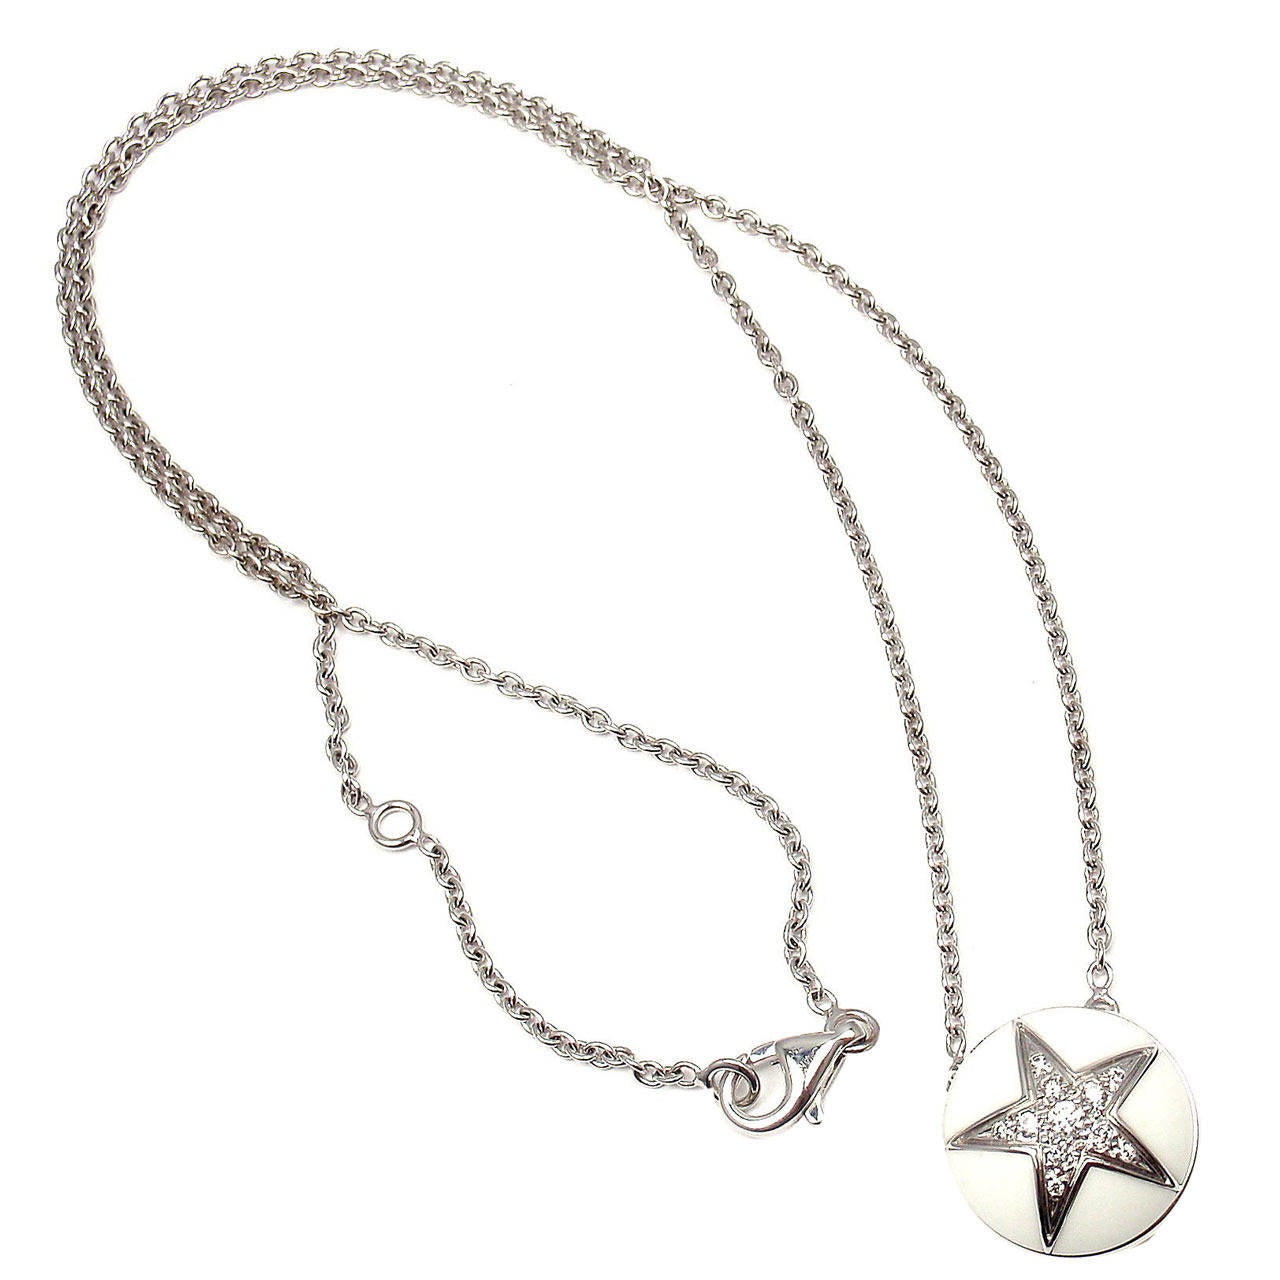 Chanel Comete Star White Agate Diamond Gold Necklace at 1stdibs